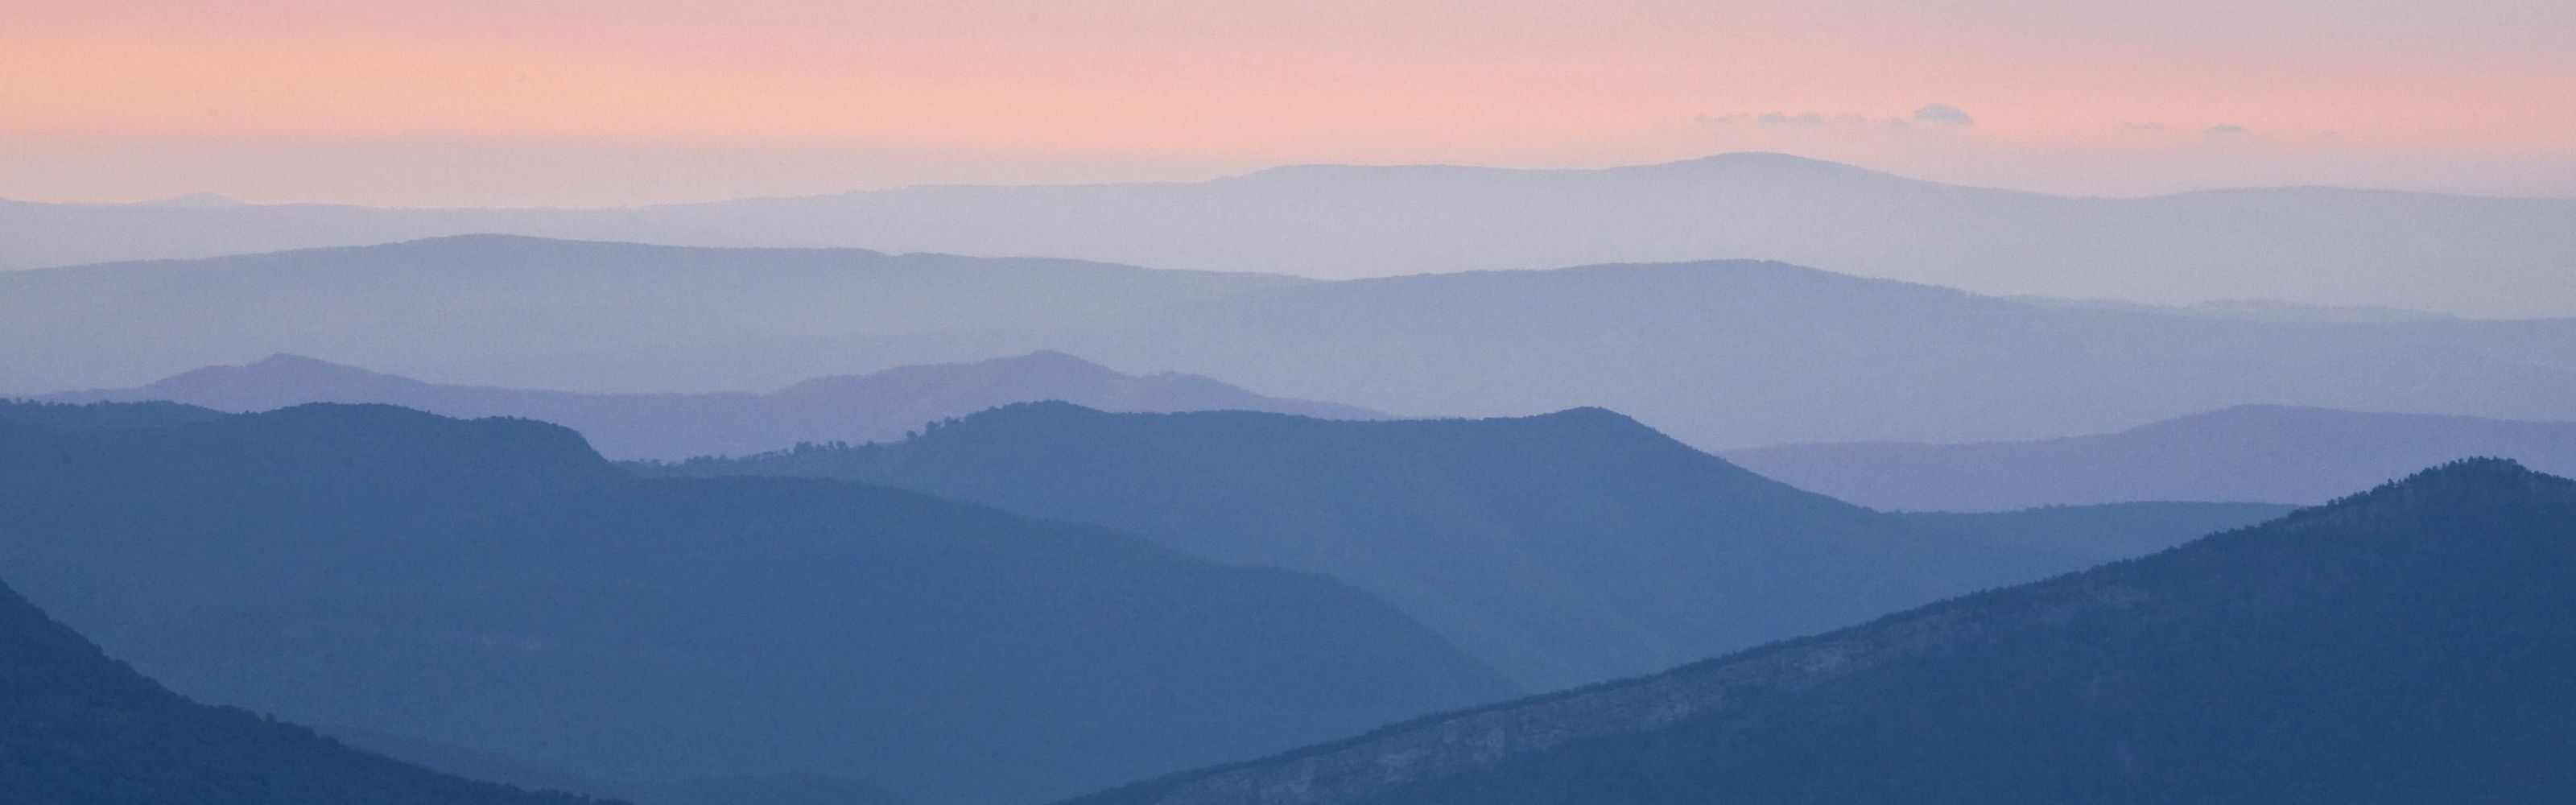 View looking across a vast series of mountains, each more pale in color as they reach toward the horizon, under a dusky orange and purple sunrise sky.